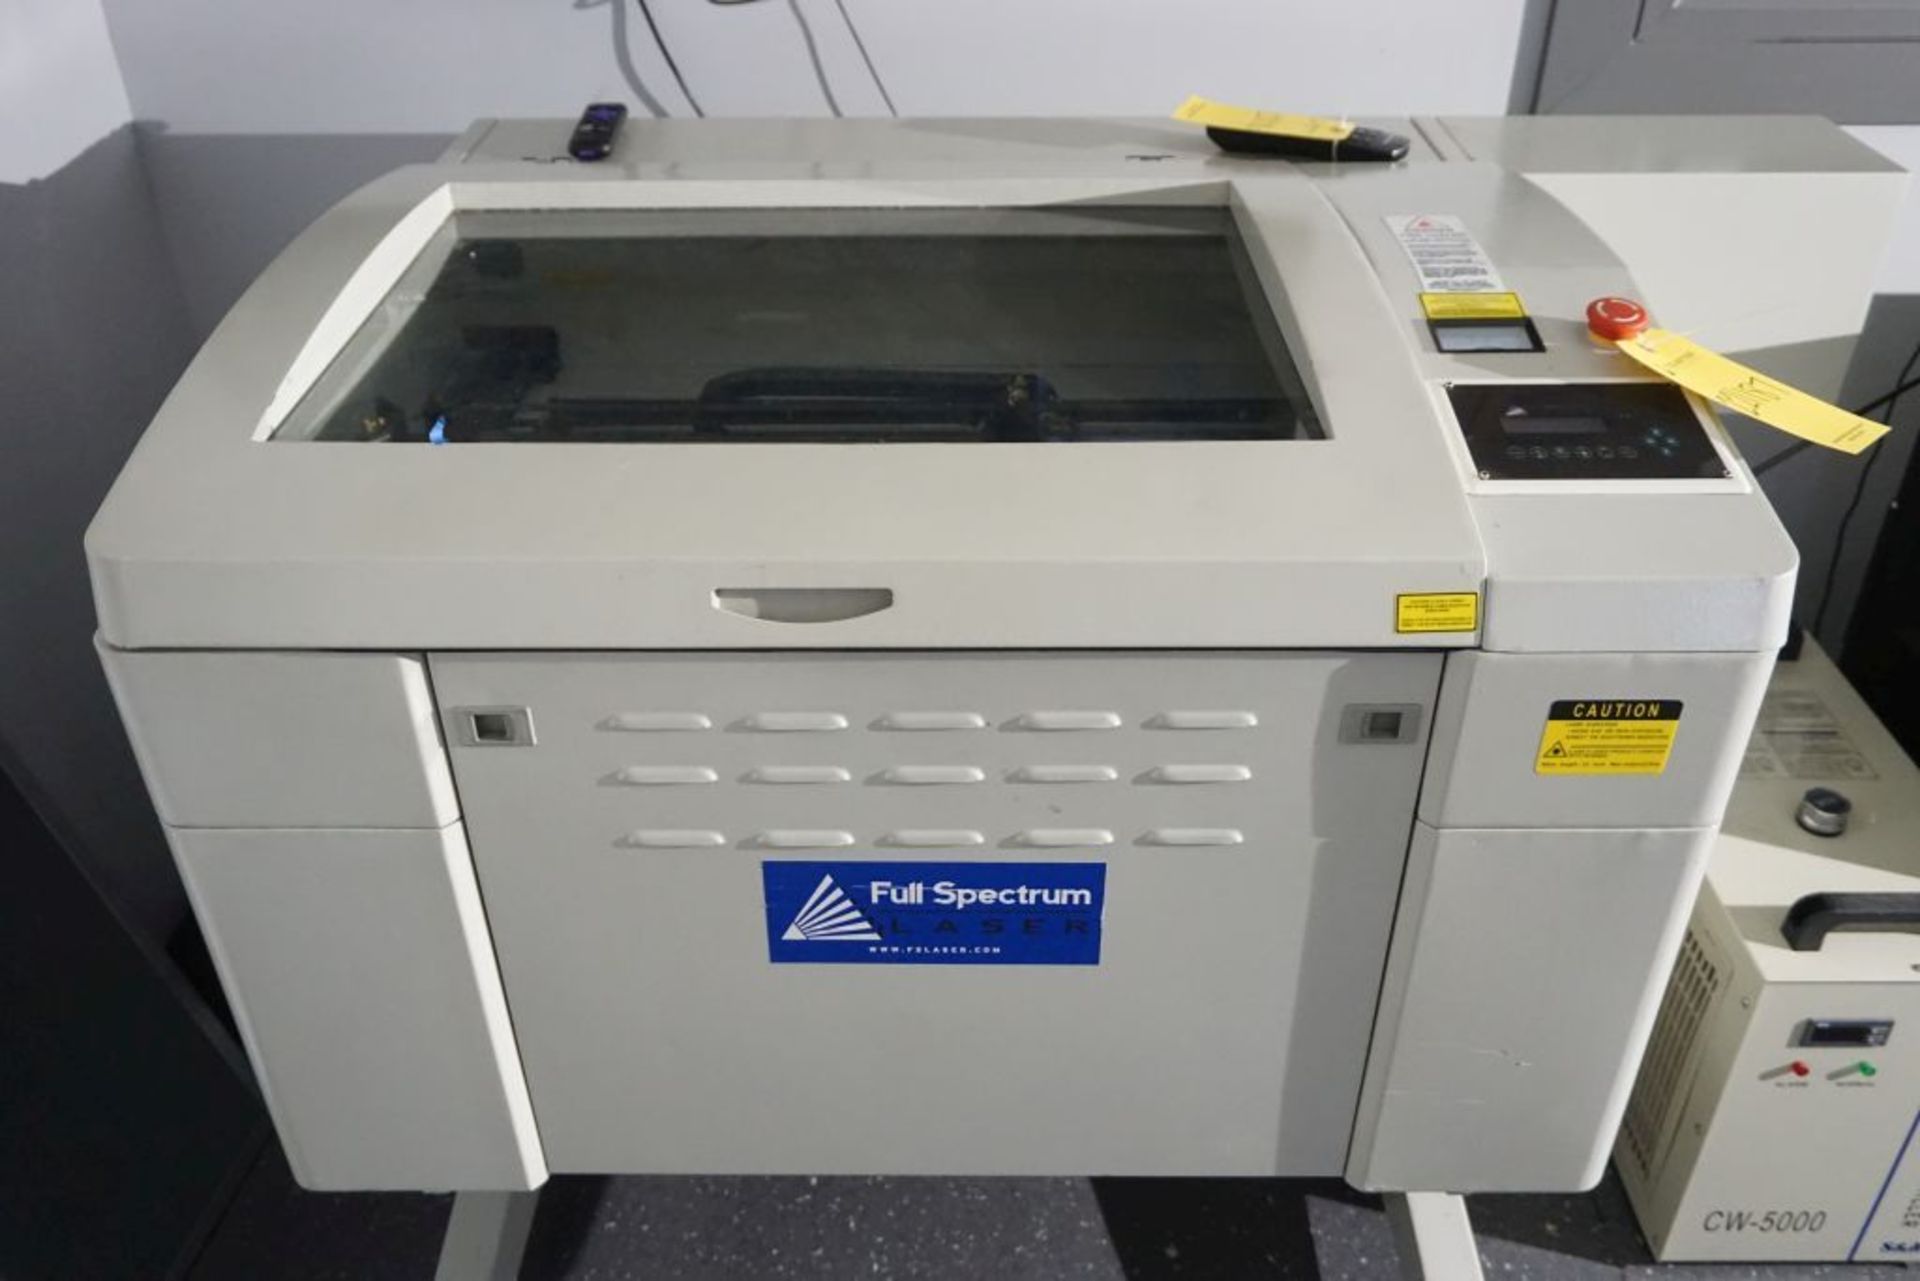 Full Spectrum 90Watt Laser Marking and Etching System|Model: PS 2418; Includes: CW-5000 Industrial - Image 2 of 18